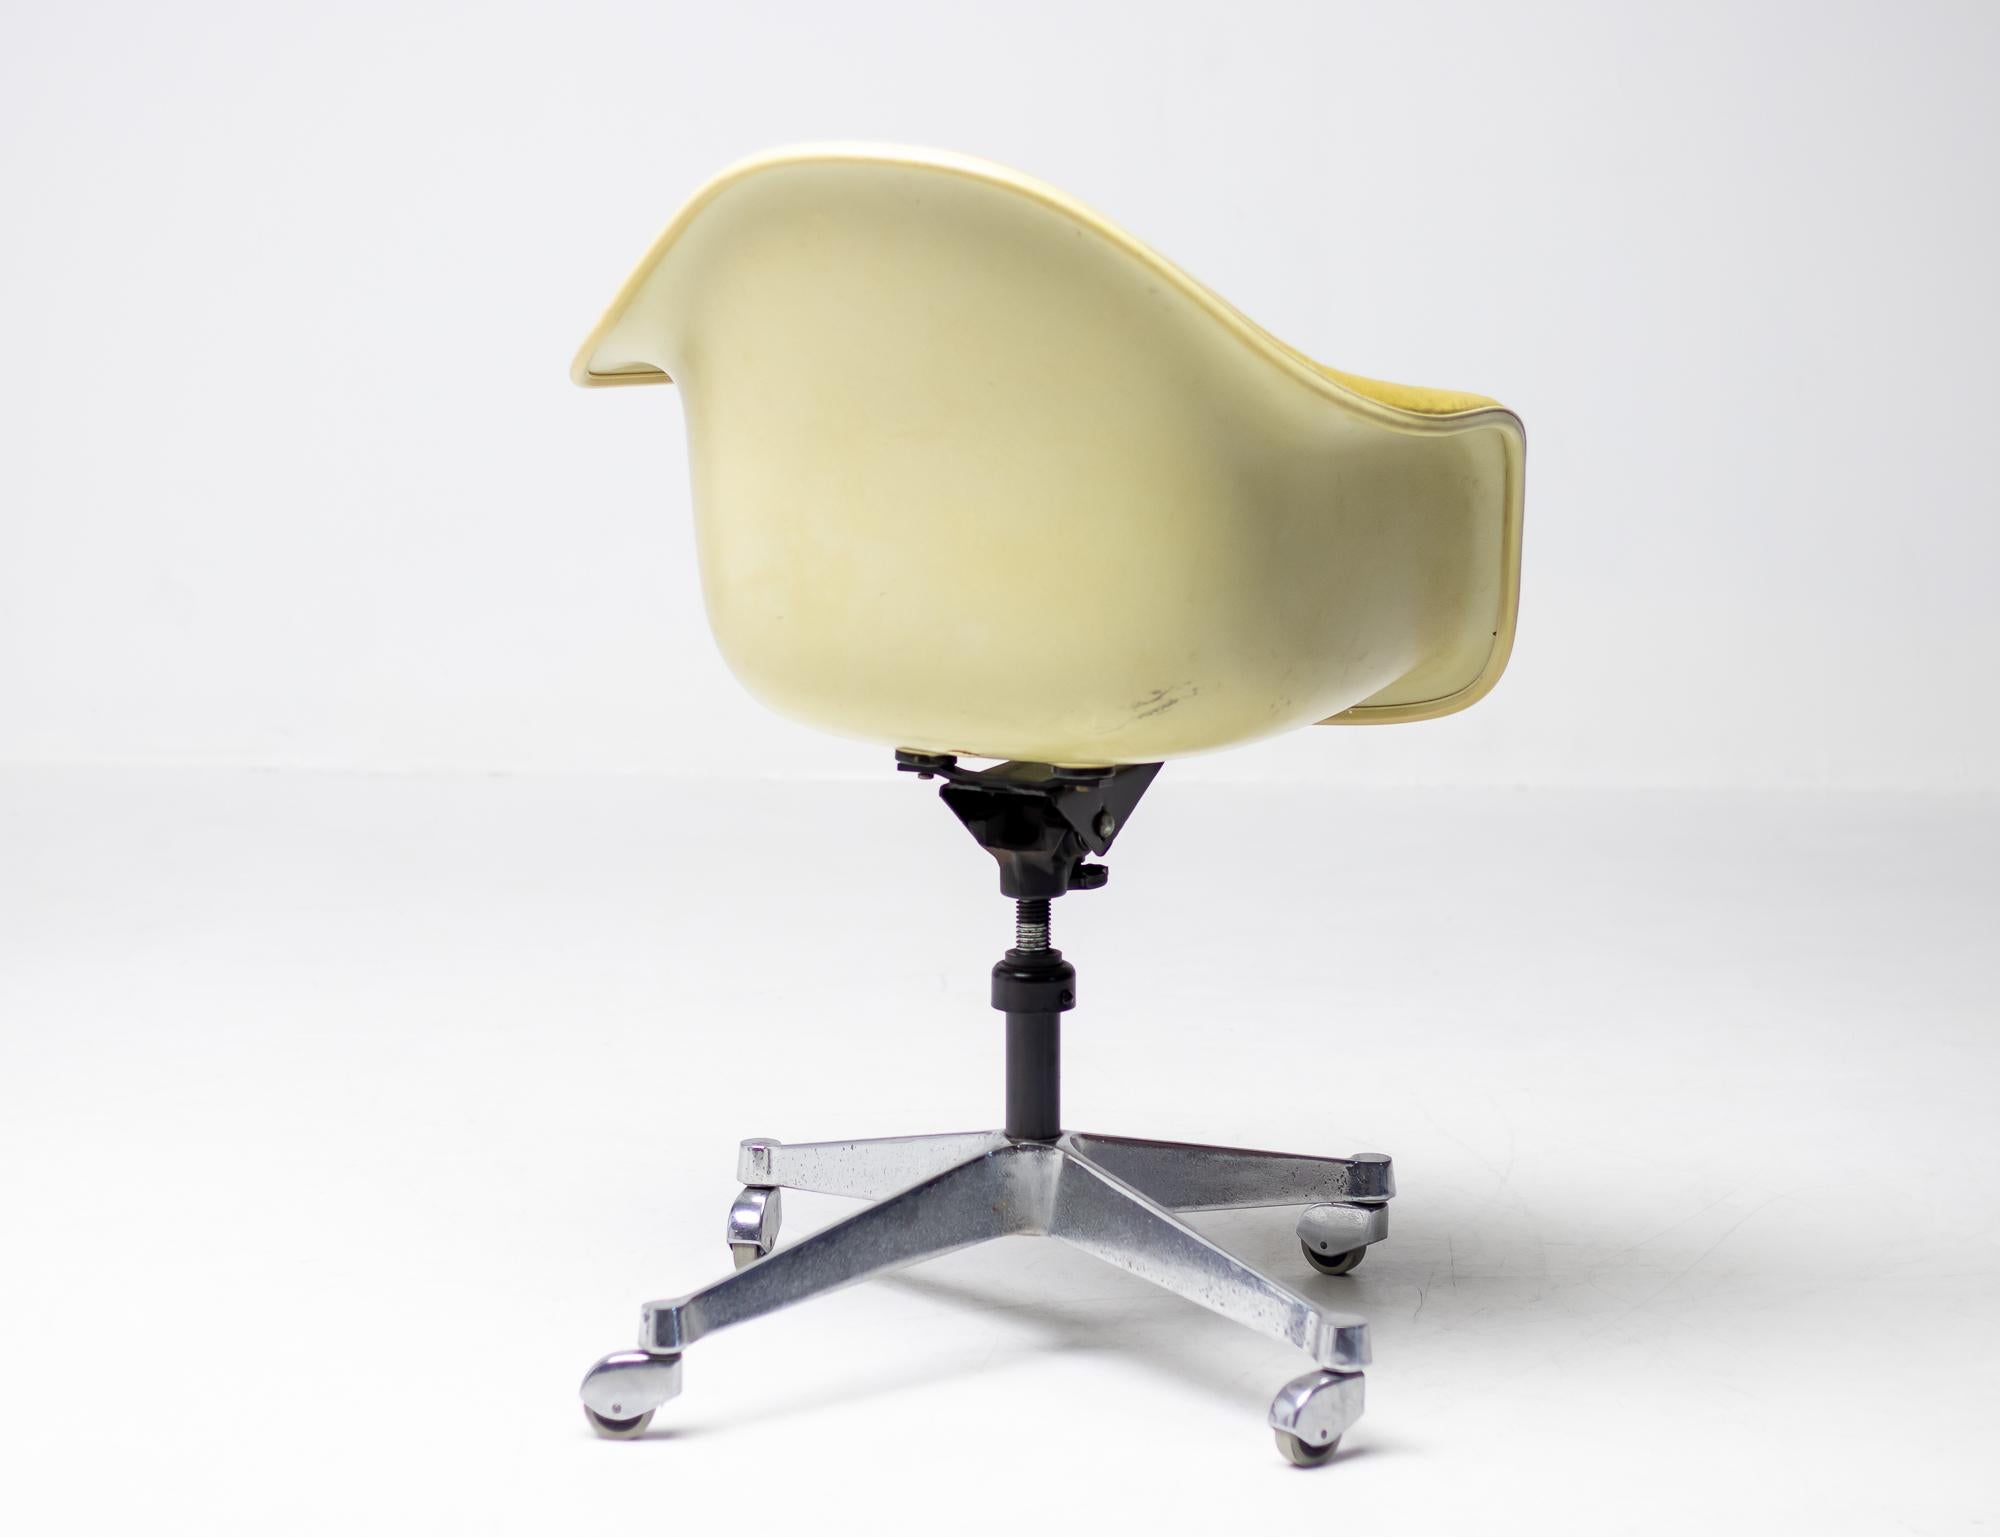 Classic Charles & Ray Eames height adjustable desk chair on castors with tilt and swivel with a fiberglass armshell on a chrome base. The armshell is upholstered in yellow fabric. Tilt, swivel and height adjustment are fully functional.
     